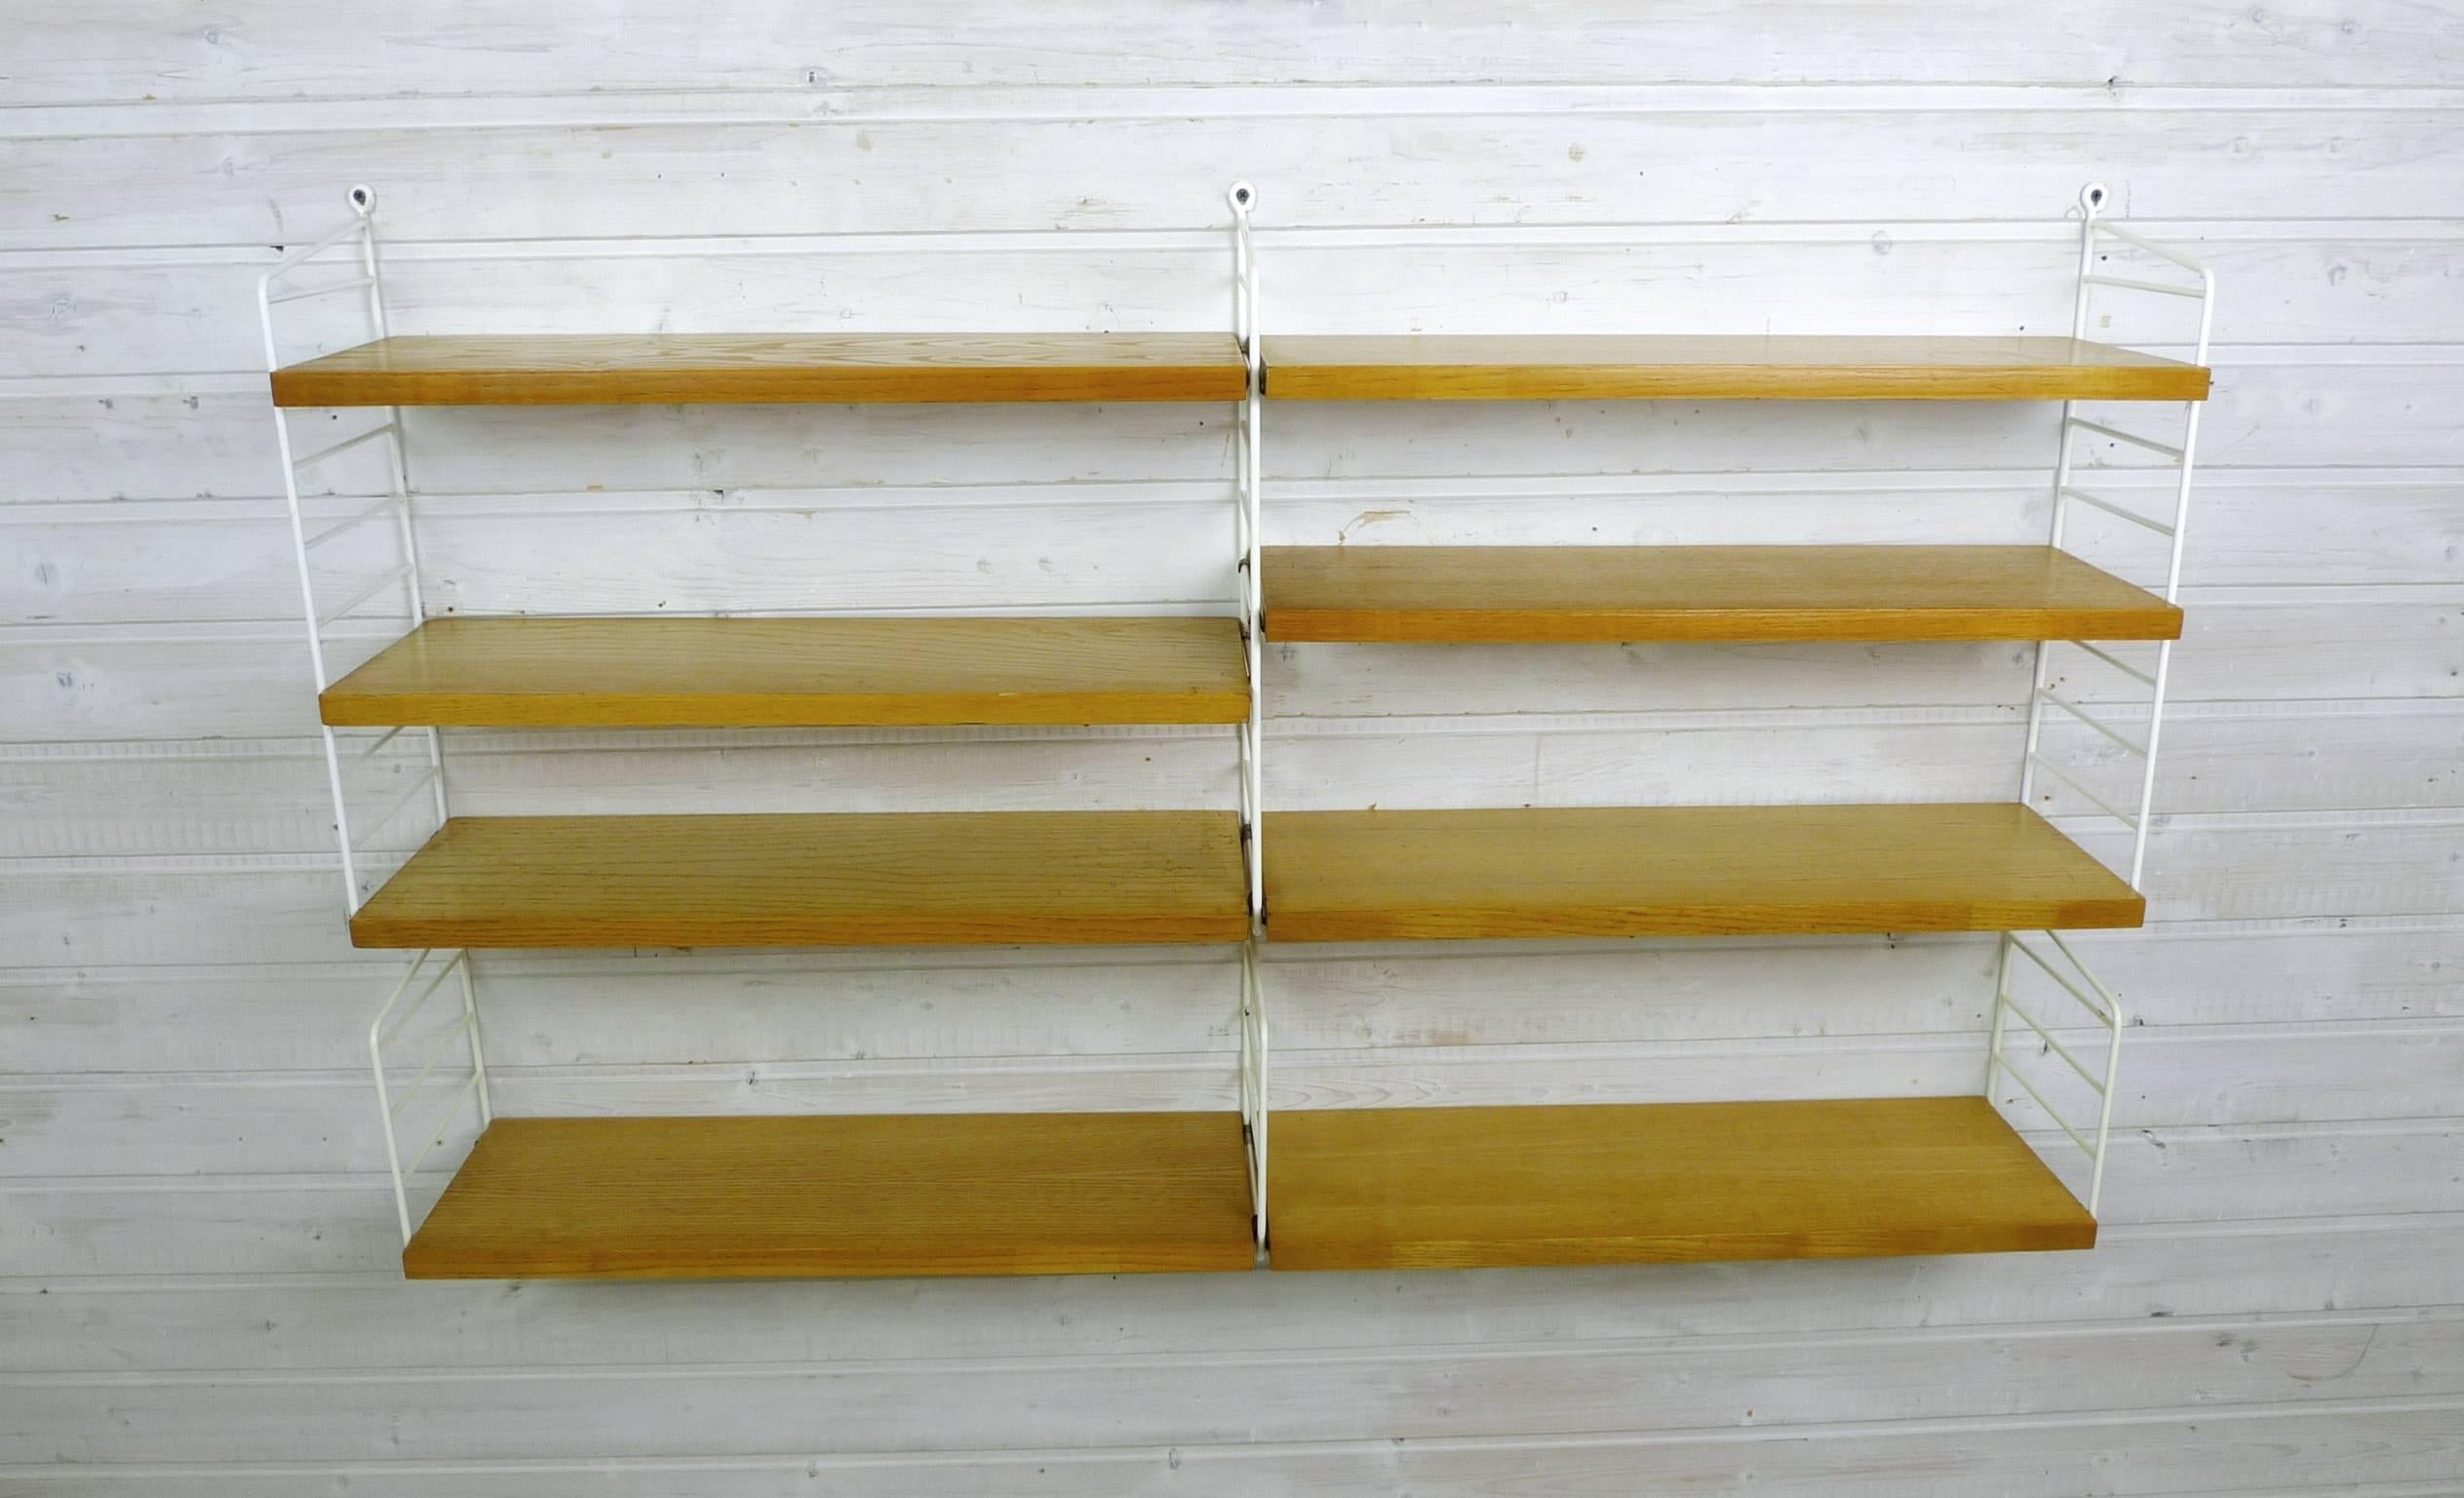 Nisse Strinning designed his famous shelf system in 1949, and it was produced in his own manufacturing company, String Design AB in Sweden.
This wall shelf consists of six white-coated ladders and eight shelves of ash, with a depth of 20 cm. The